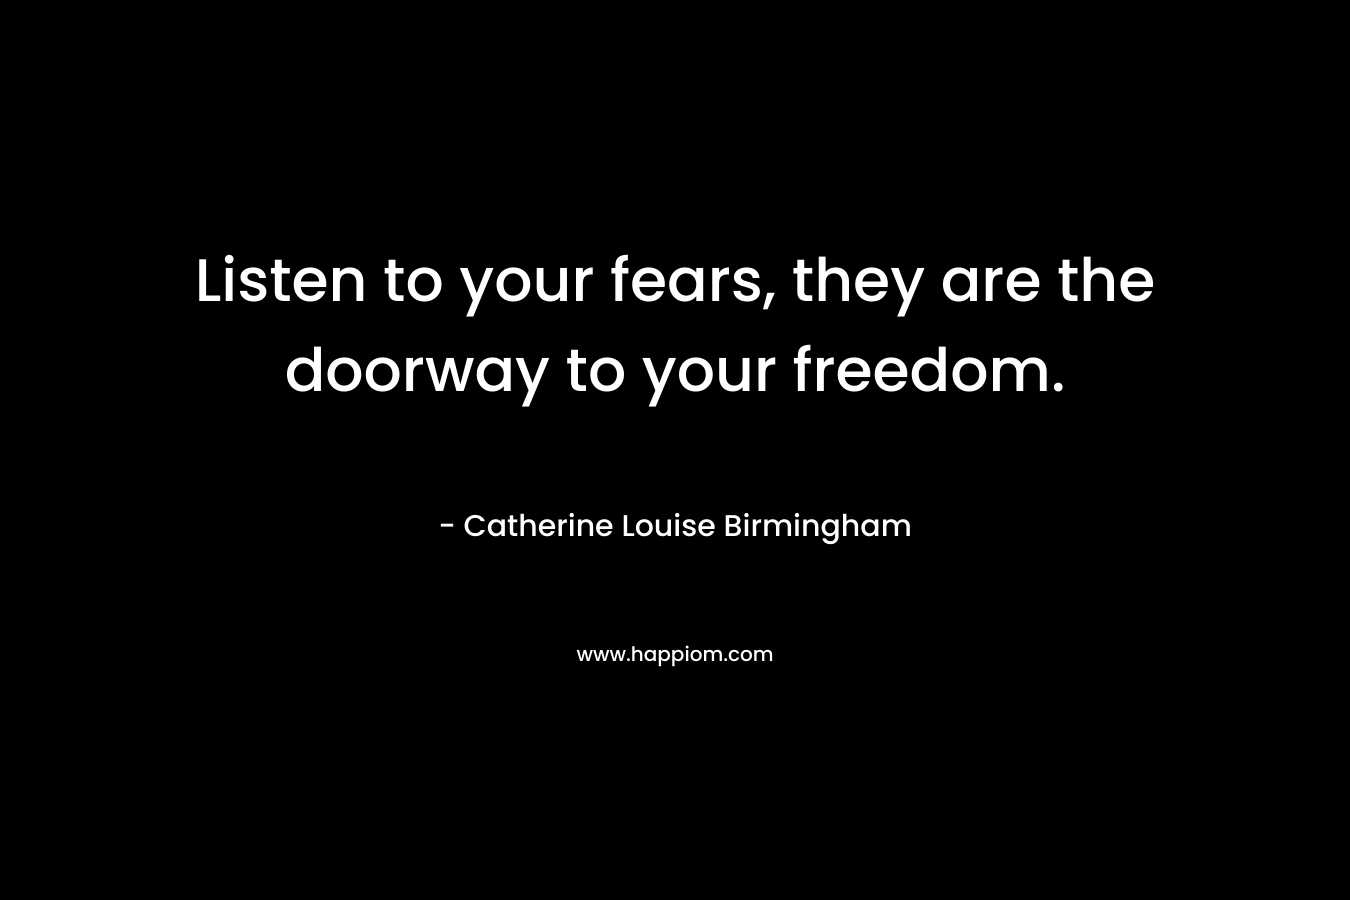 Listen to your fears, they are the doorway to your freedom. – Catherine Louise Birmingham